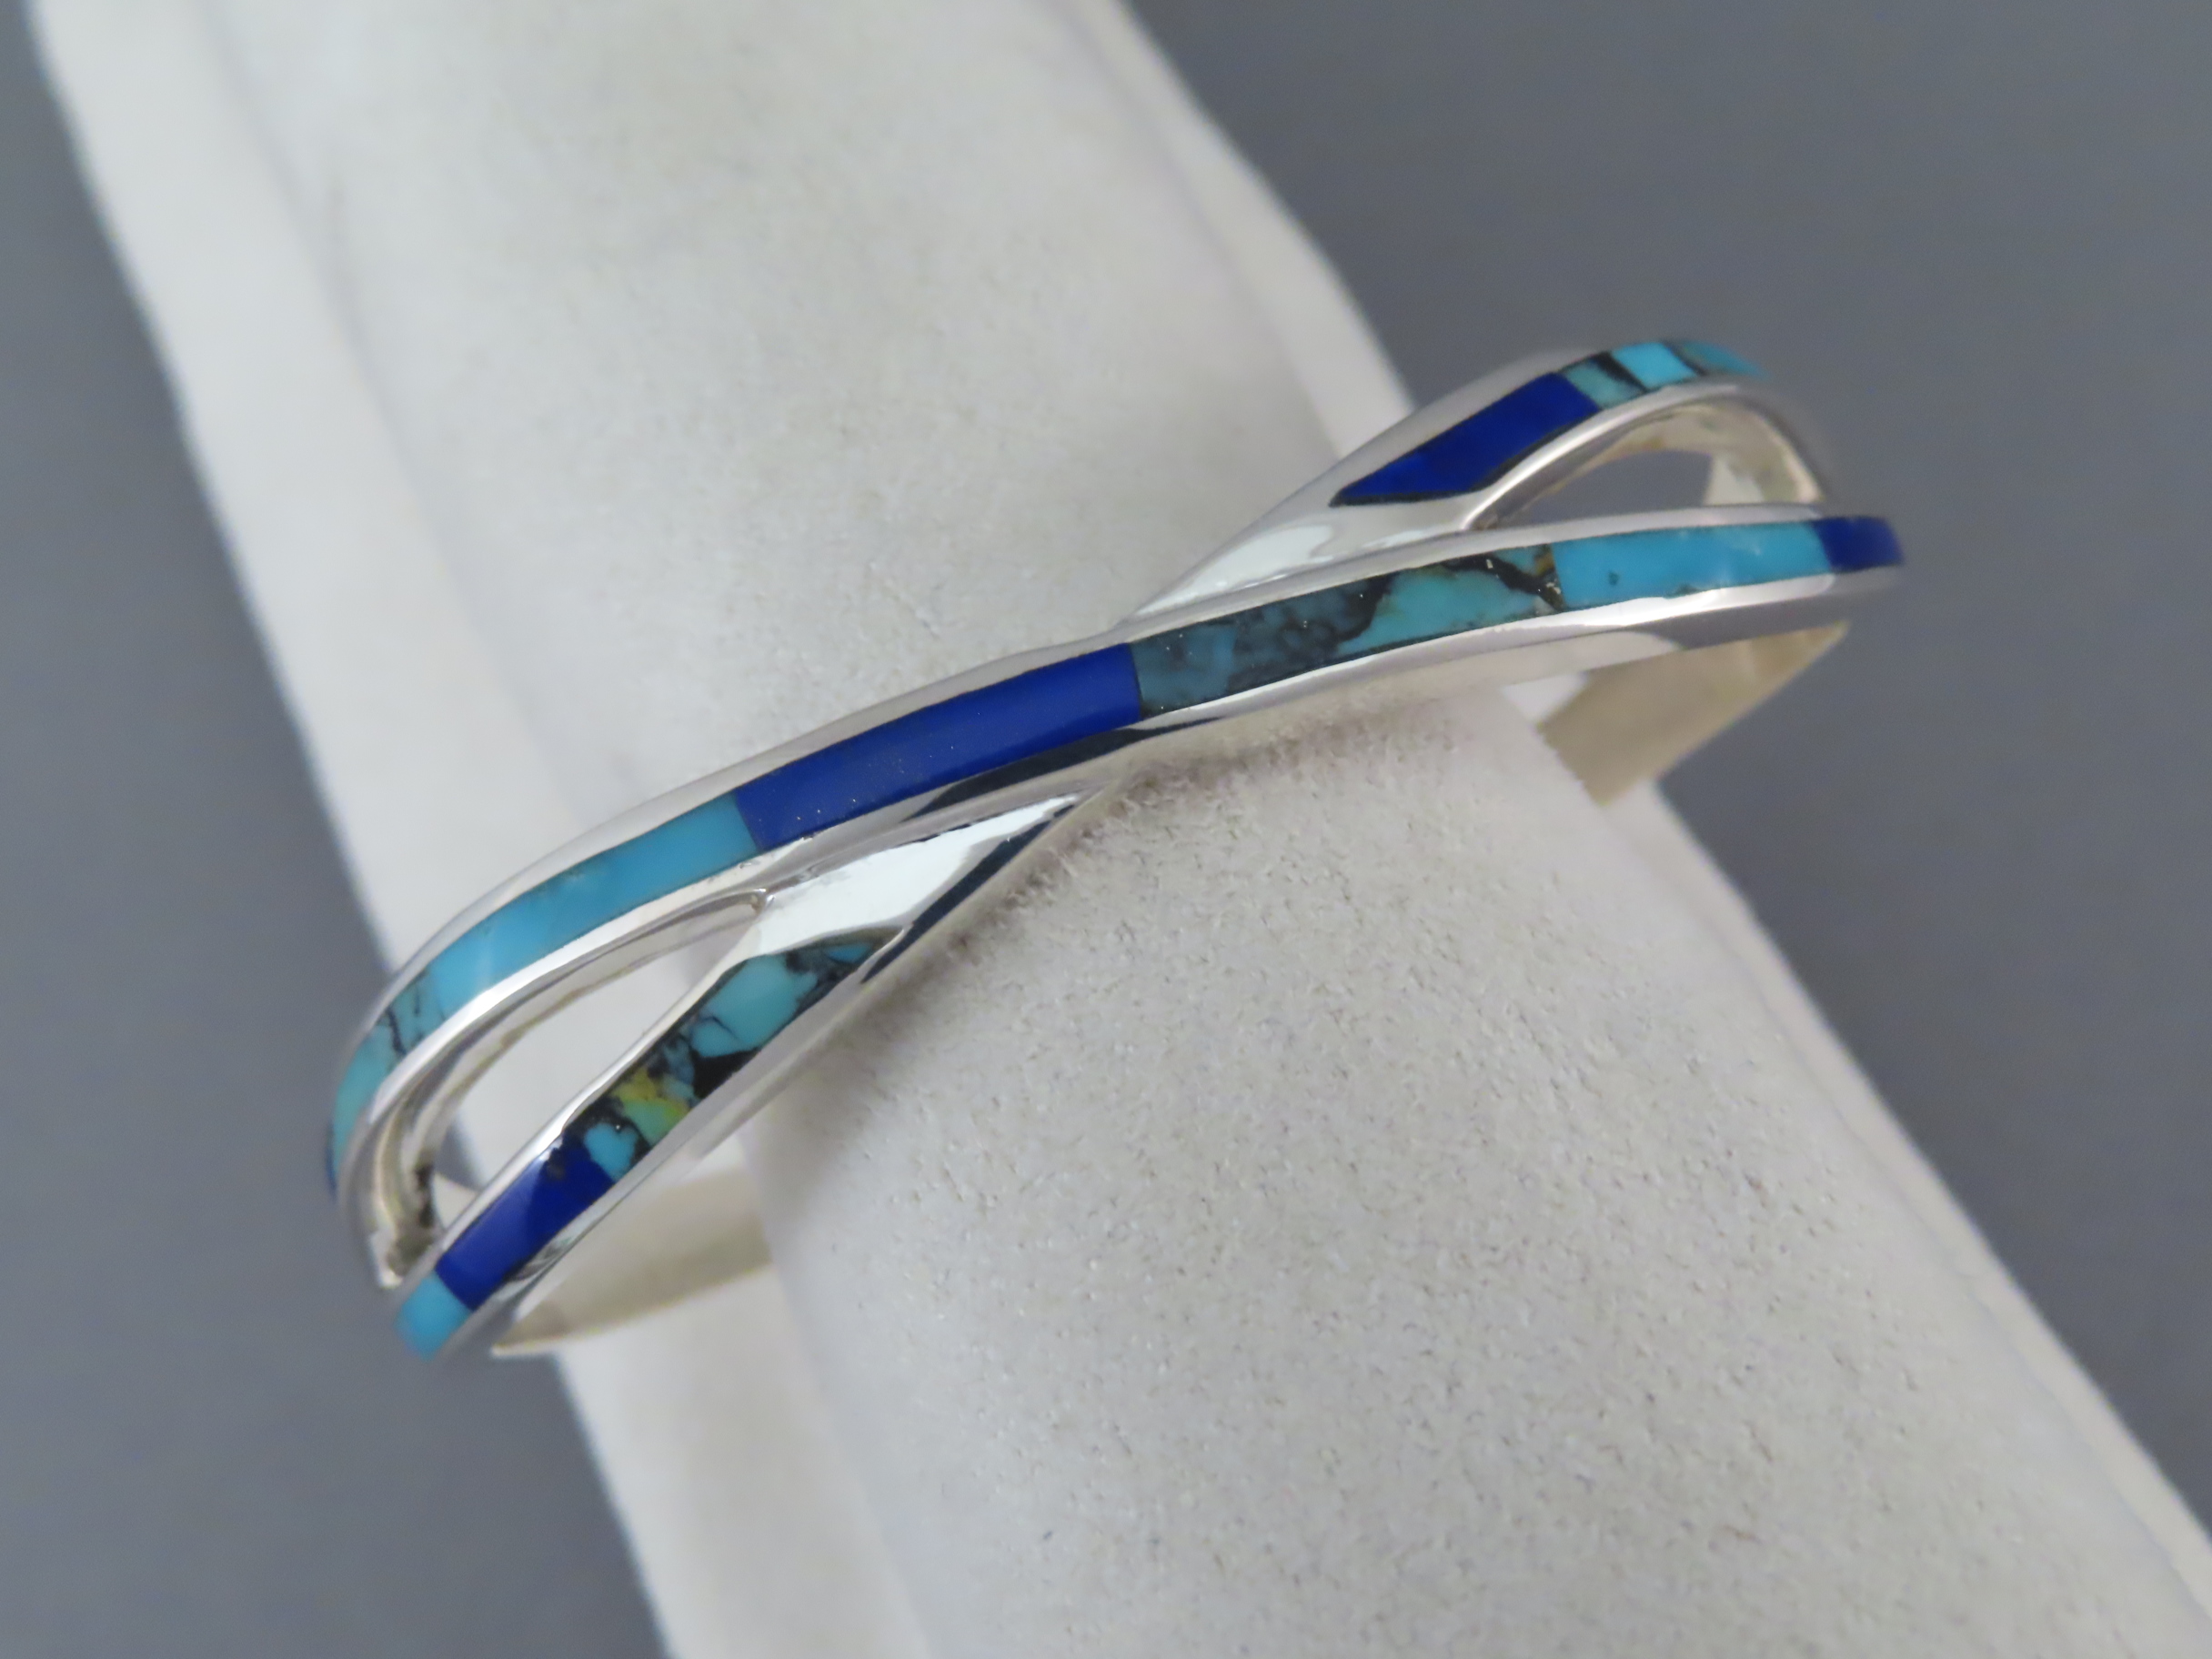 Turquoise Jewelry - Turquoise & Lapis Inlay Cuff Bracelet by Native American jeweler, Charles Willie FOR SALE $425-